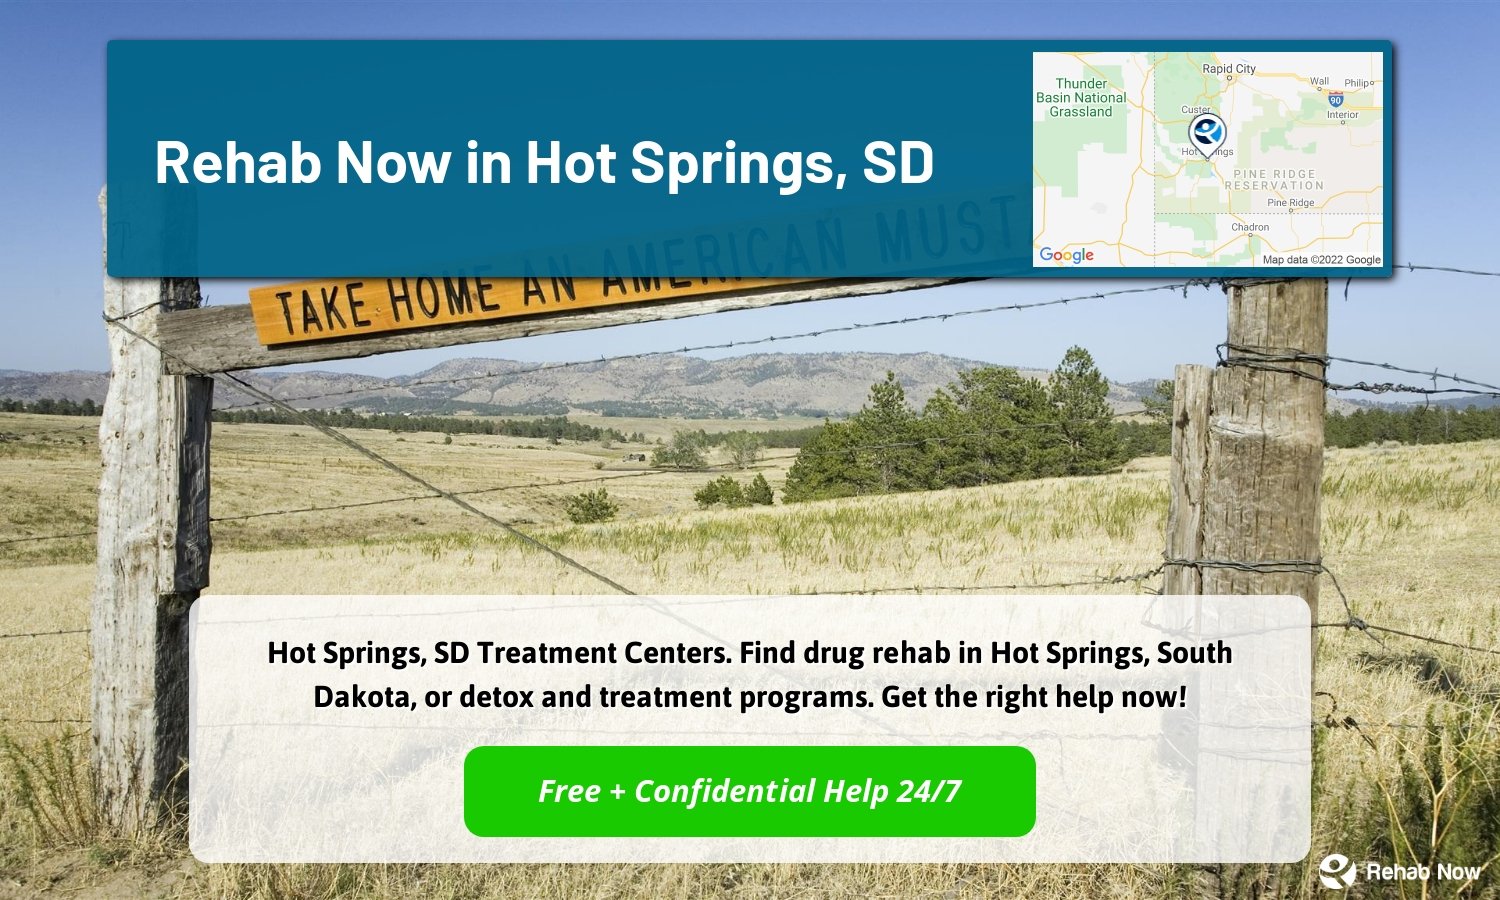 Hot Springs, SD Treatment Centers. Find drug rehab in Hot Springs, South Dakota, or detox and treatment programs. Get the right help now!